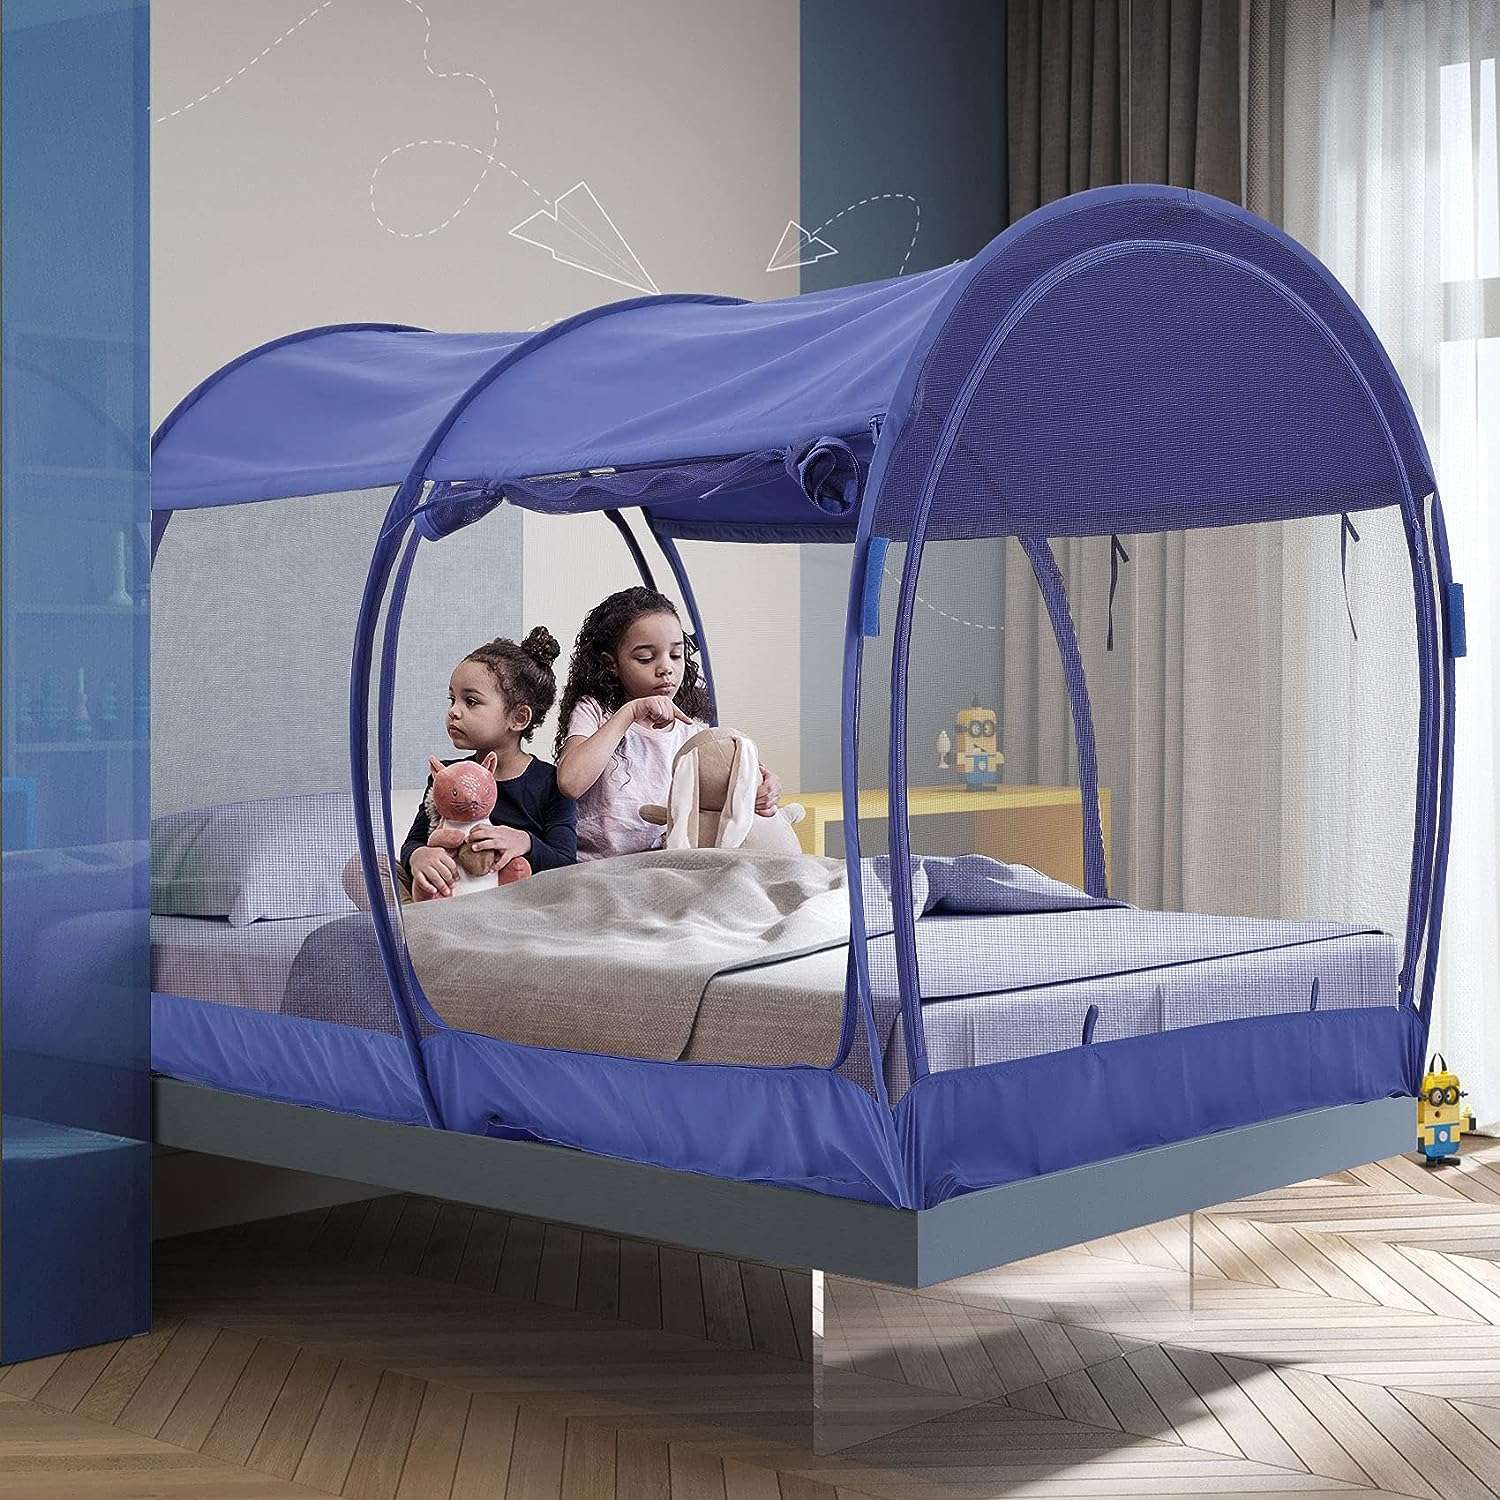 Create Your Personal Oasis with Alvantor Mosquito Net Bed Canopy Bed Tents! 🌙🛌